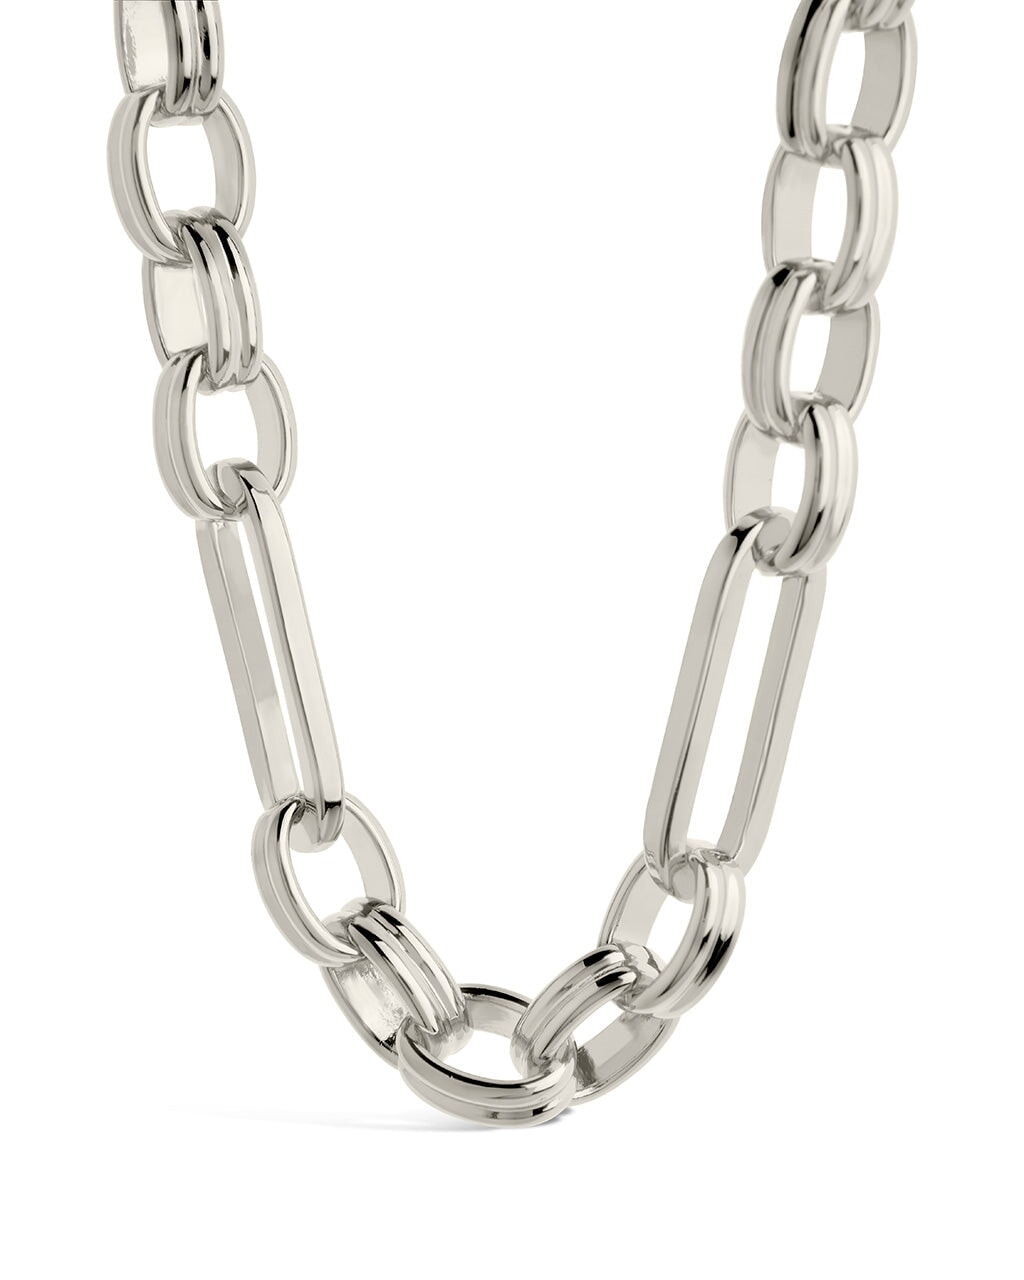 Oval Cable Chain Extender 2 Inch Sterling Silver (1-Pc)